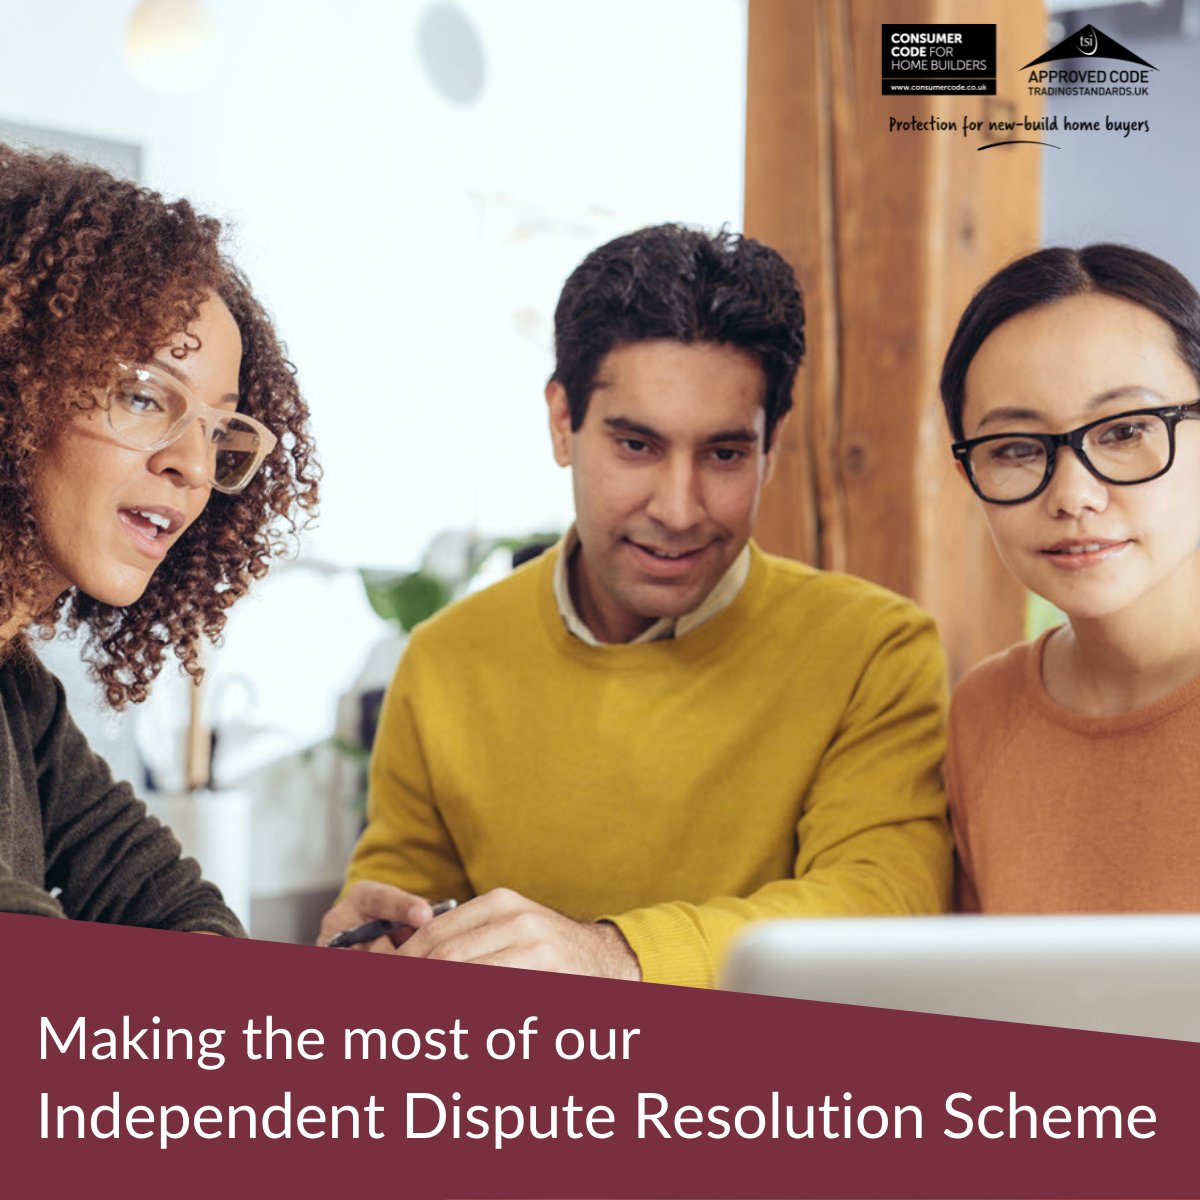 If you believe your home builder has breached the terms of the Code, our IDRS is available for you to access and raise a complaint. Here are a few things to bear in mind to ensure the process is as smooth as possible consumercode.co.uk/making-the-mos…